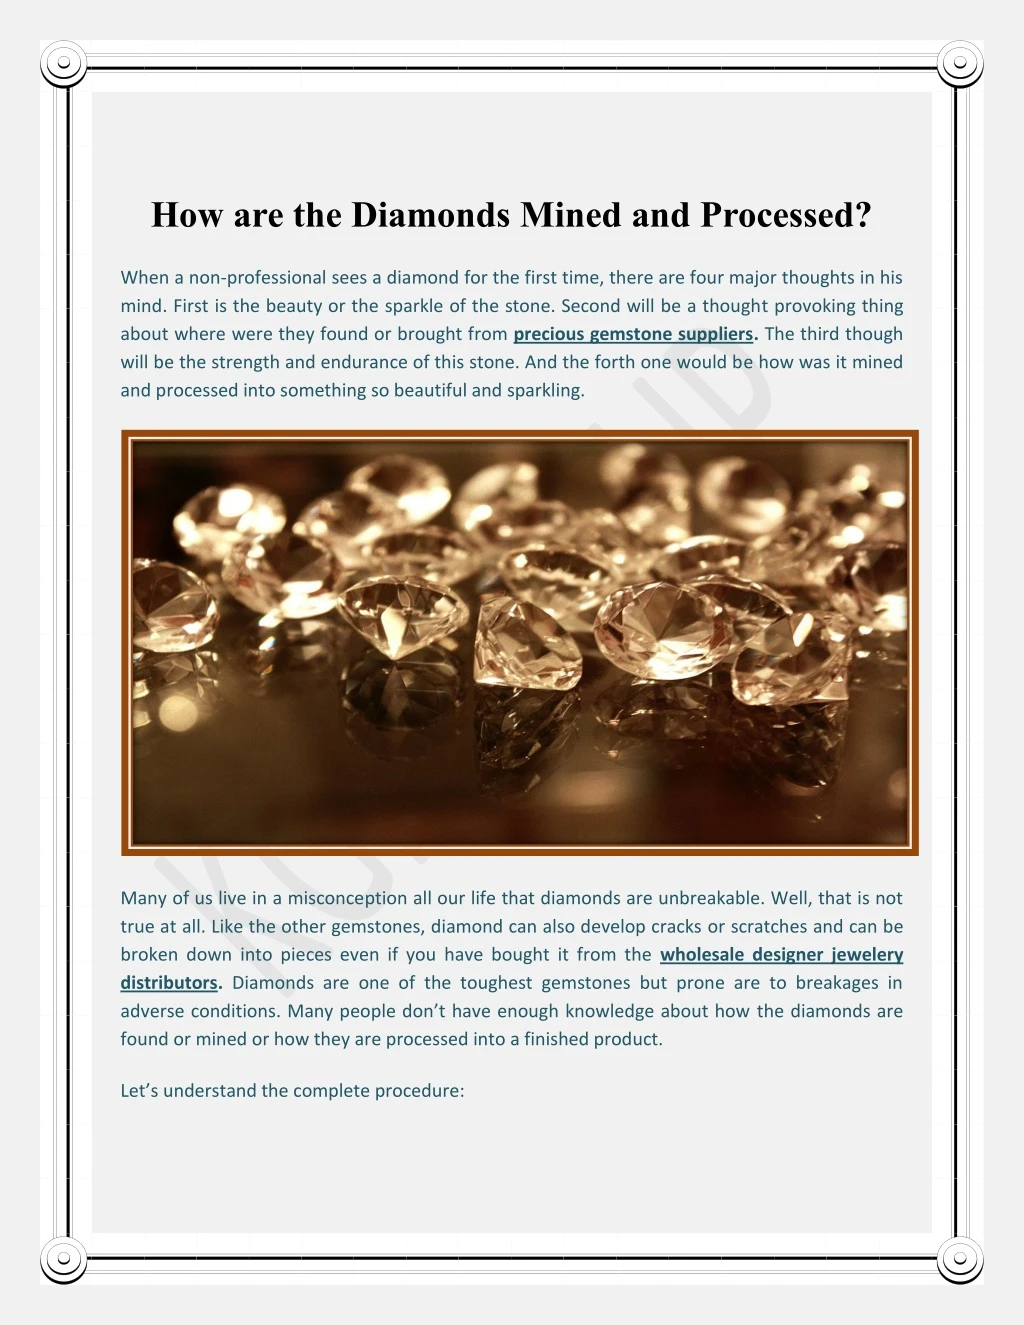 how are the diamonds mined and processed